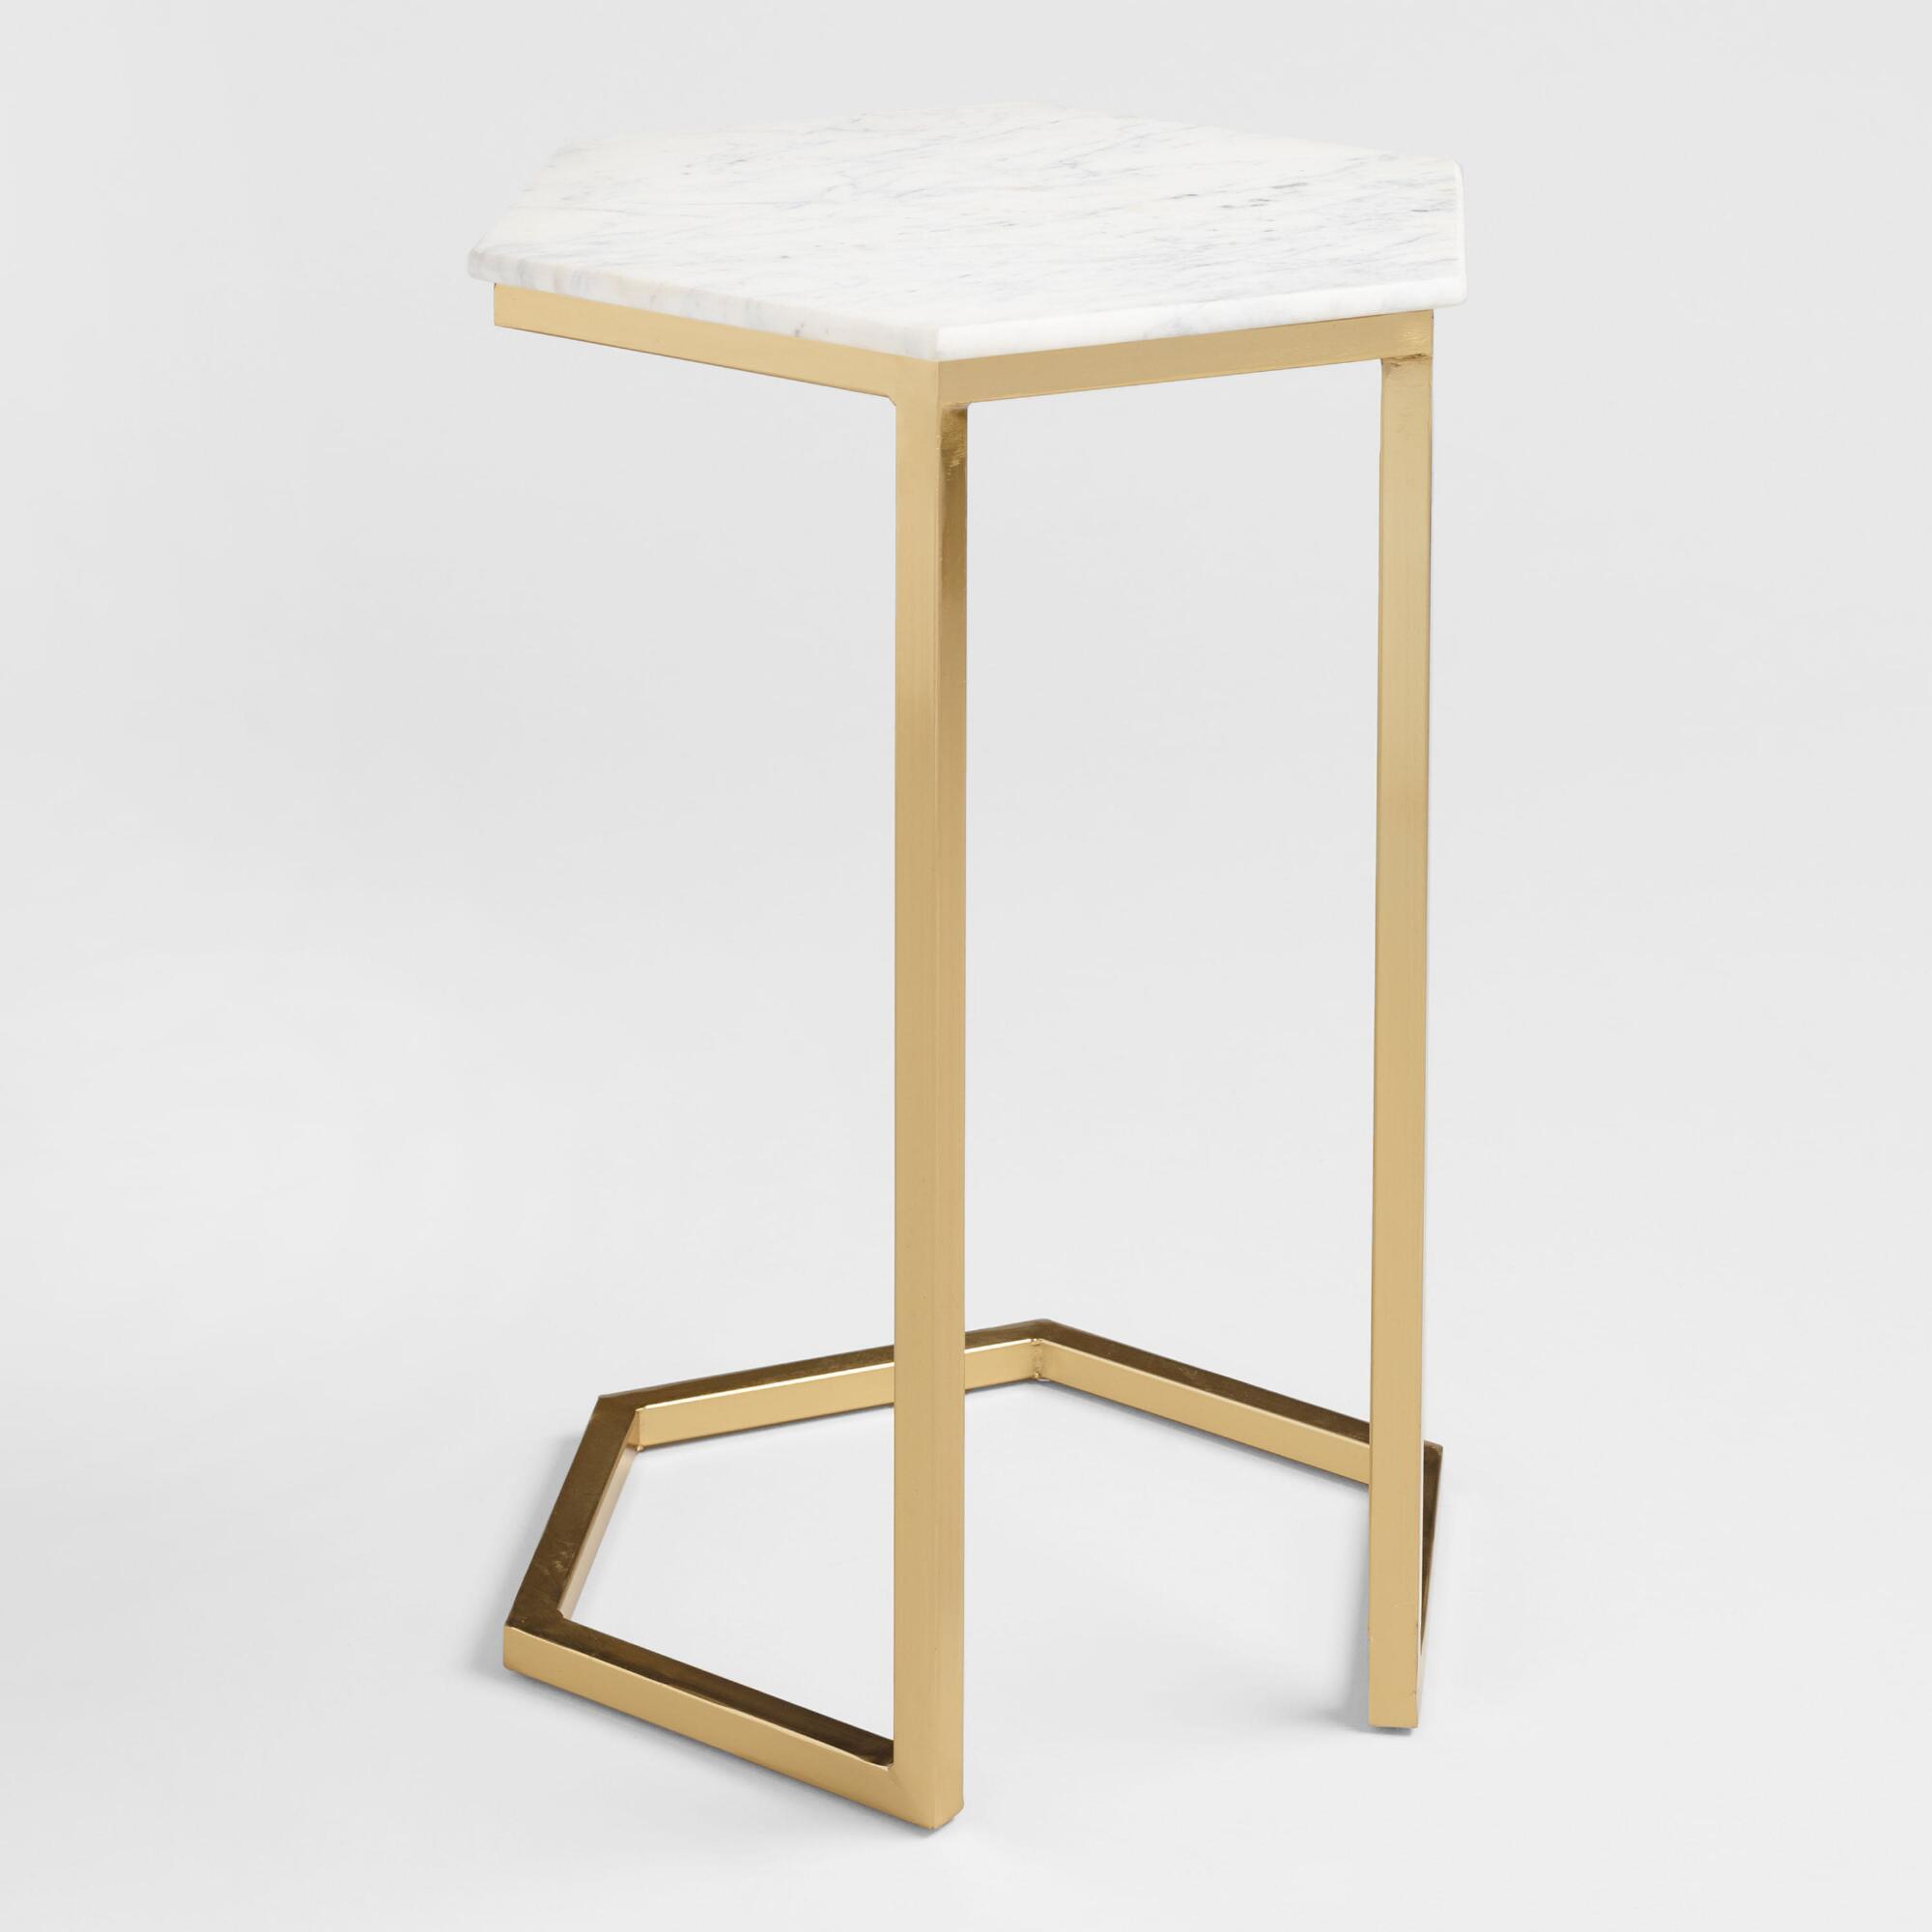 small space coffee side tables world market iipsrv fcgi mini accent table marble and gold margaux laptop cream chair bamboo diy chest whole furniture adjustable height chrome